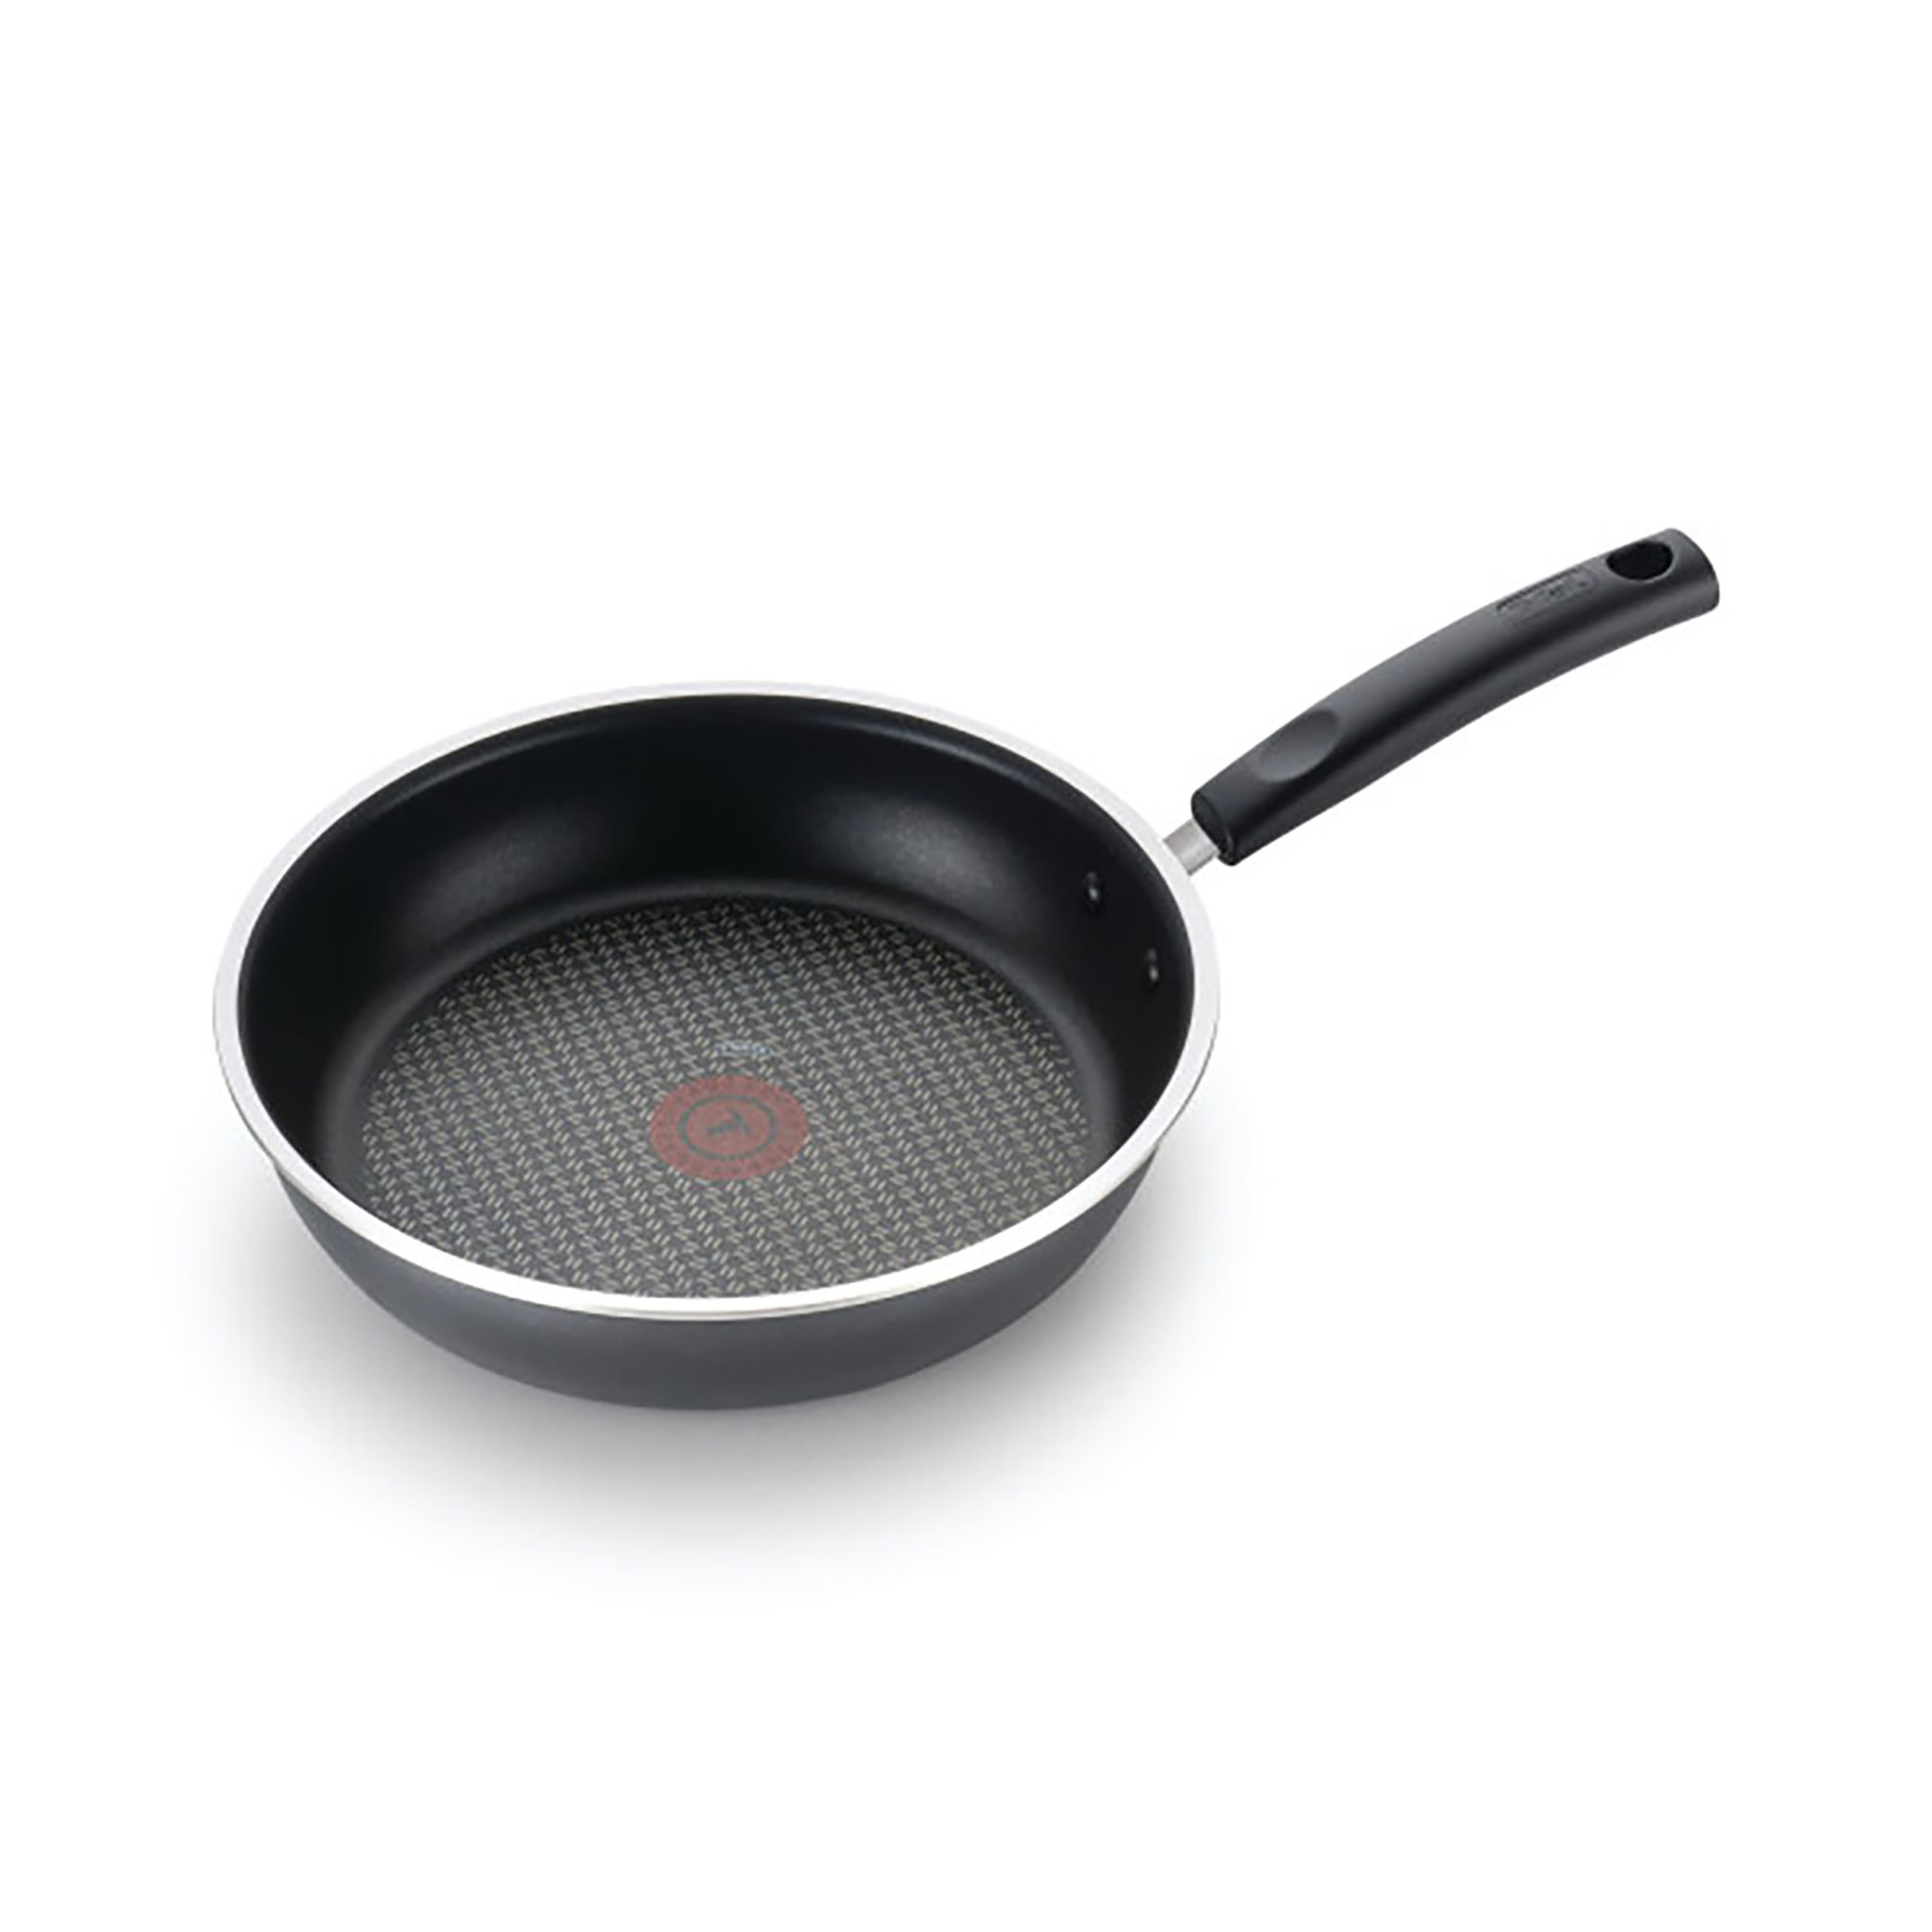 T-Fal Platinum Nonstick Fry Pan with Induction Base, Unlimited Cookware Collection, 12 inch